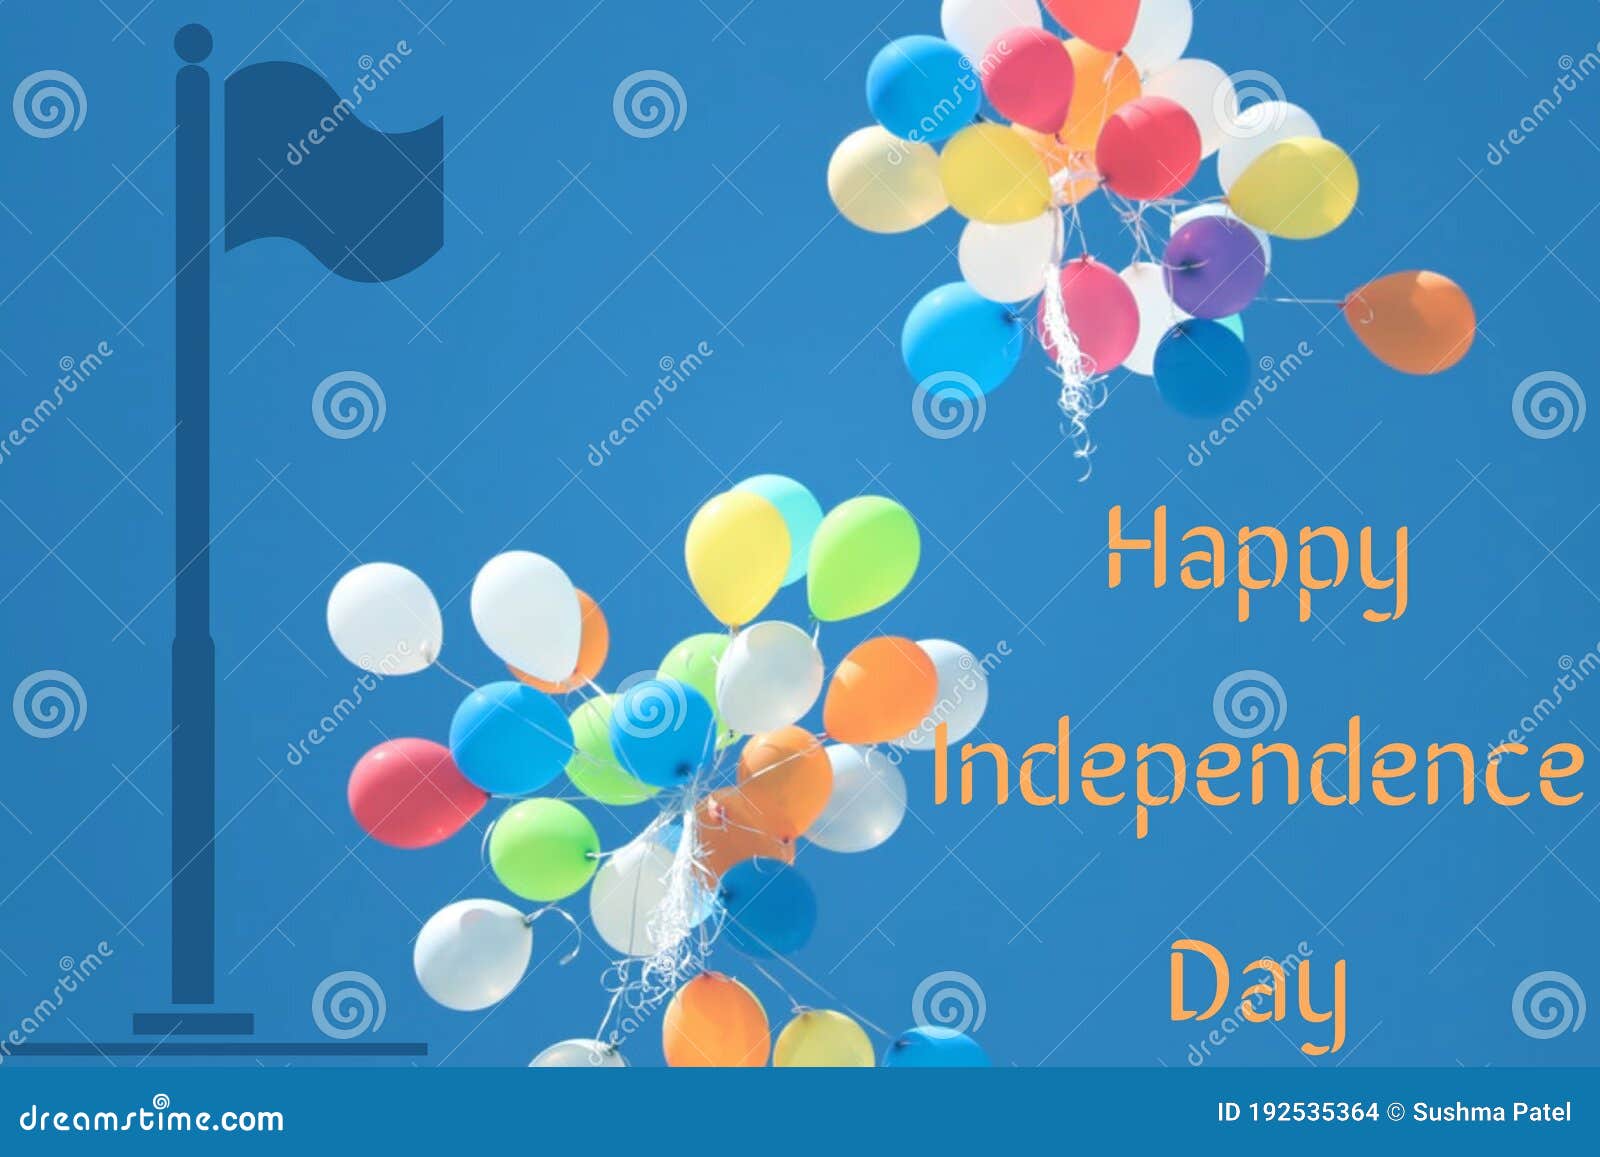 Happy Independence Day Best Wishes Stock Illustration ...